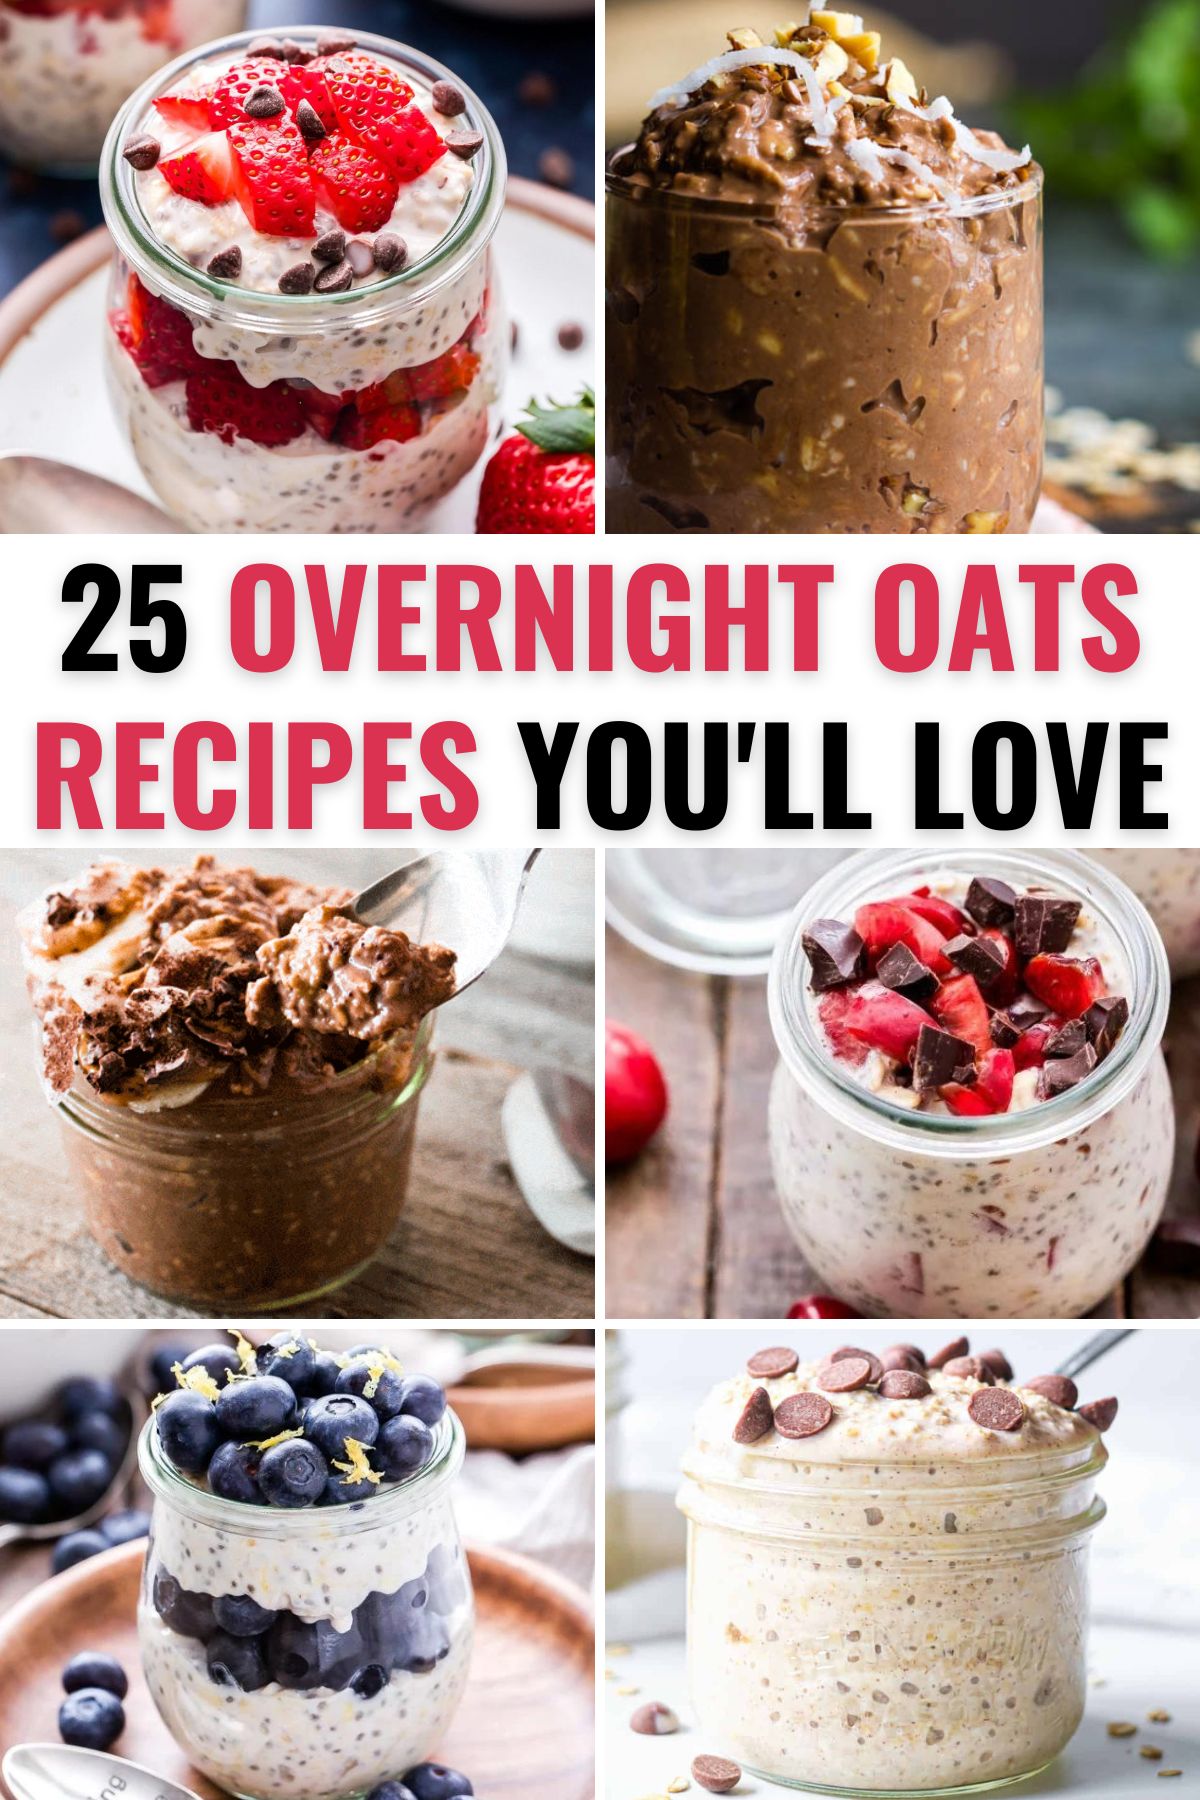  A collection of oats in a jar recipes